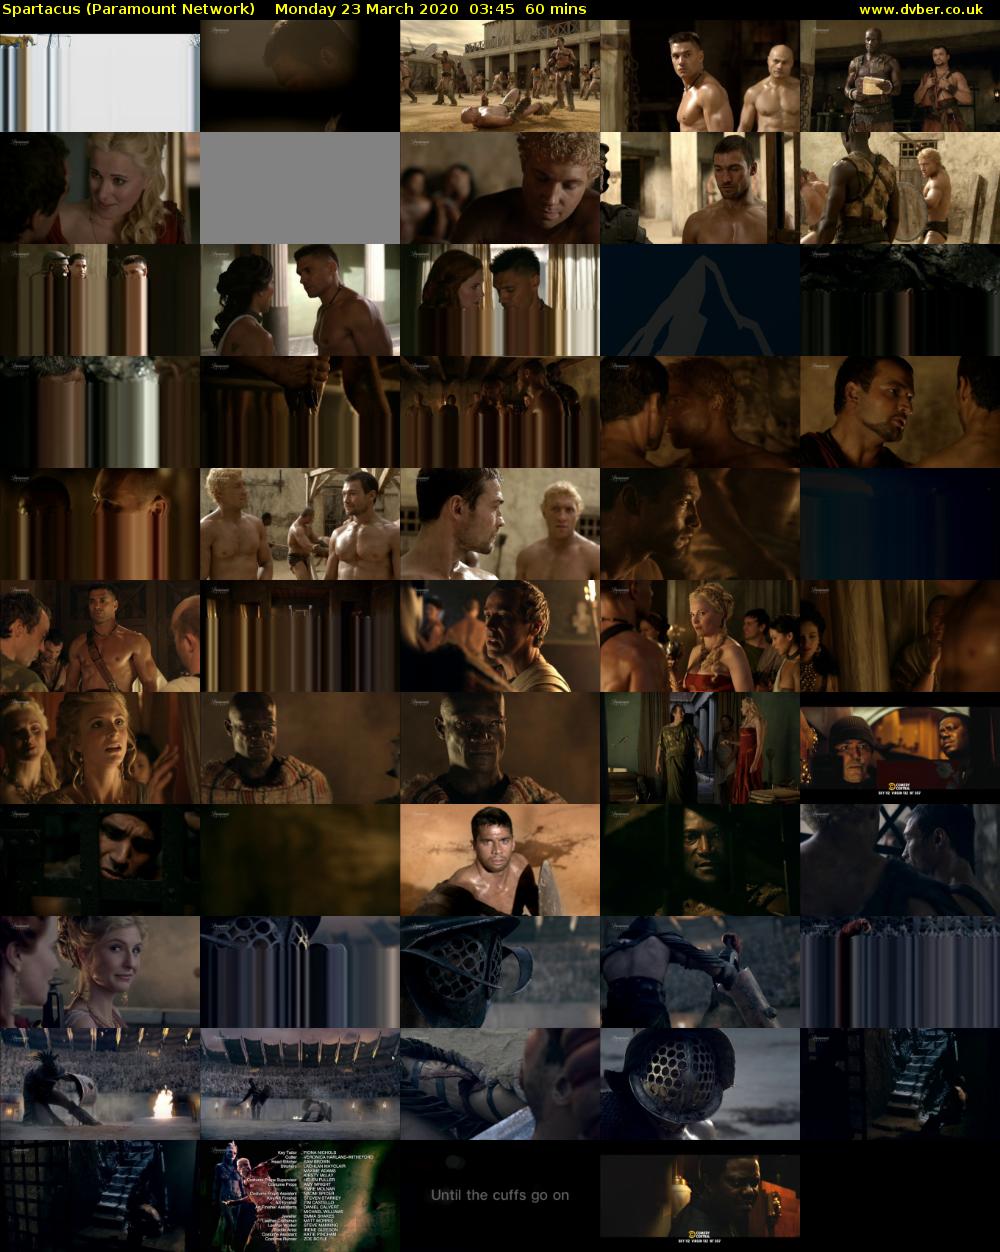 Spartacus (Paramount Network) Monday 23 March 2020 03:45 - 04:45